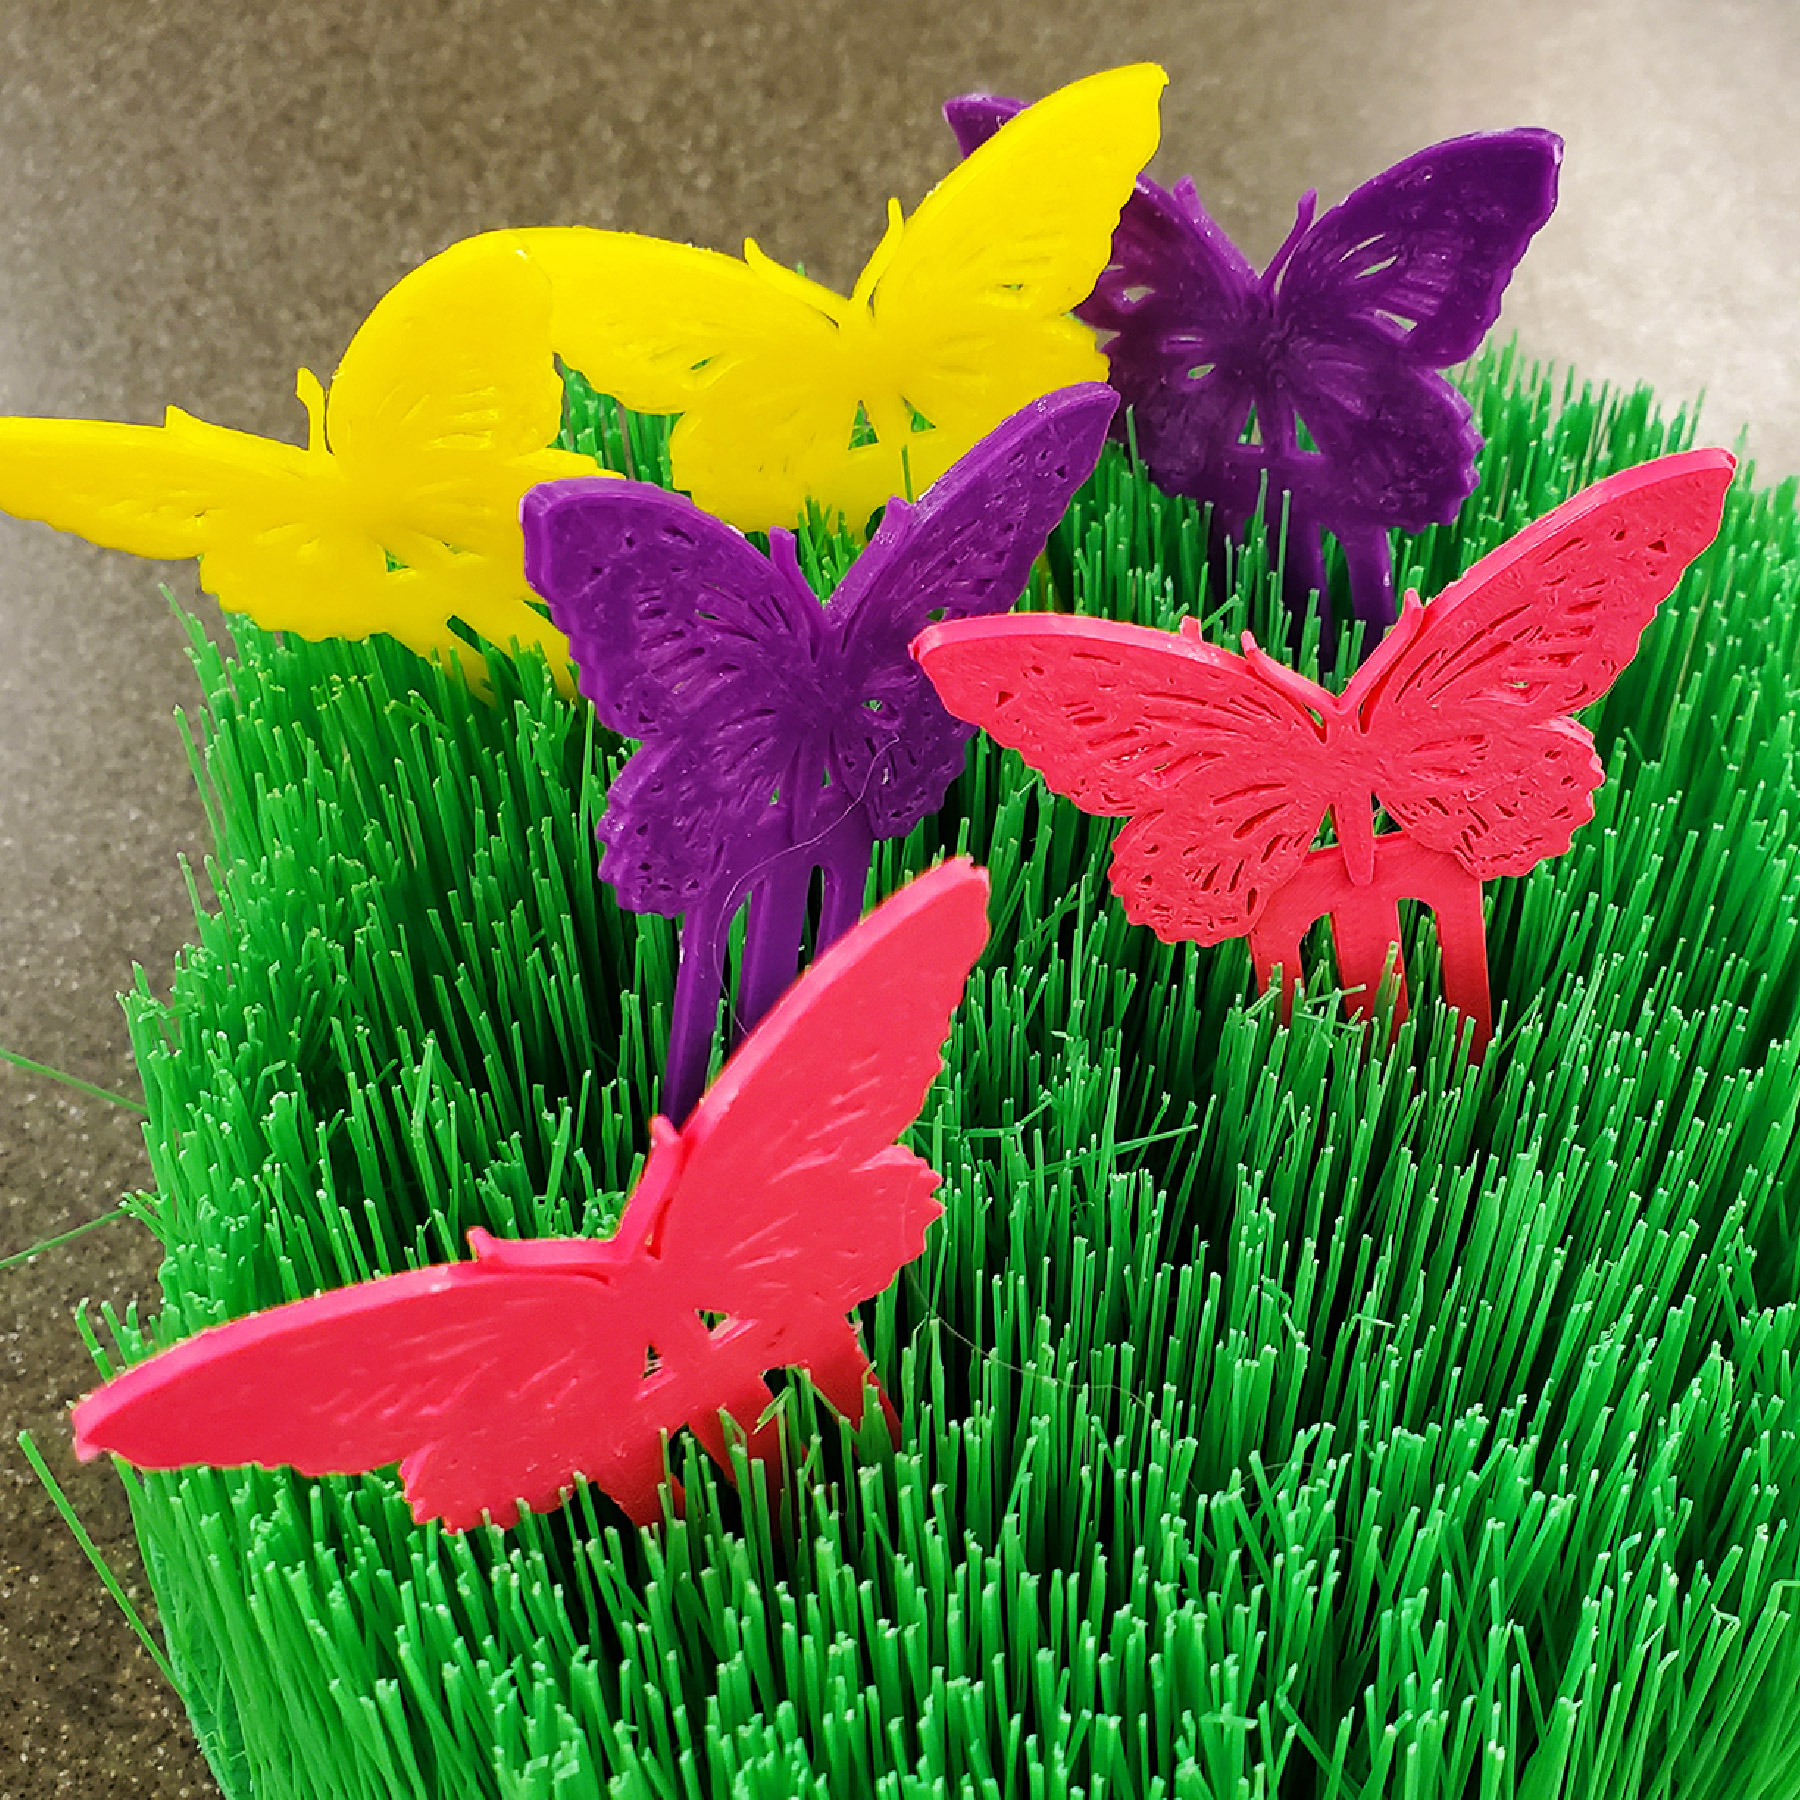 Pink, yellow, and purple 3D printed butterflies in 3D printed grass